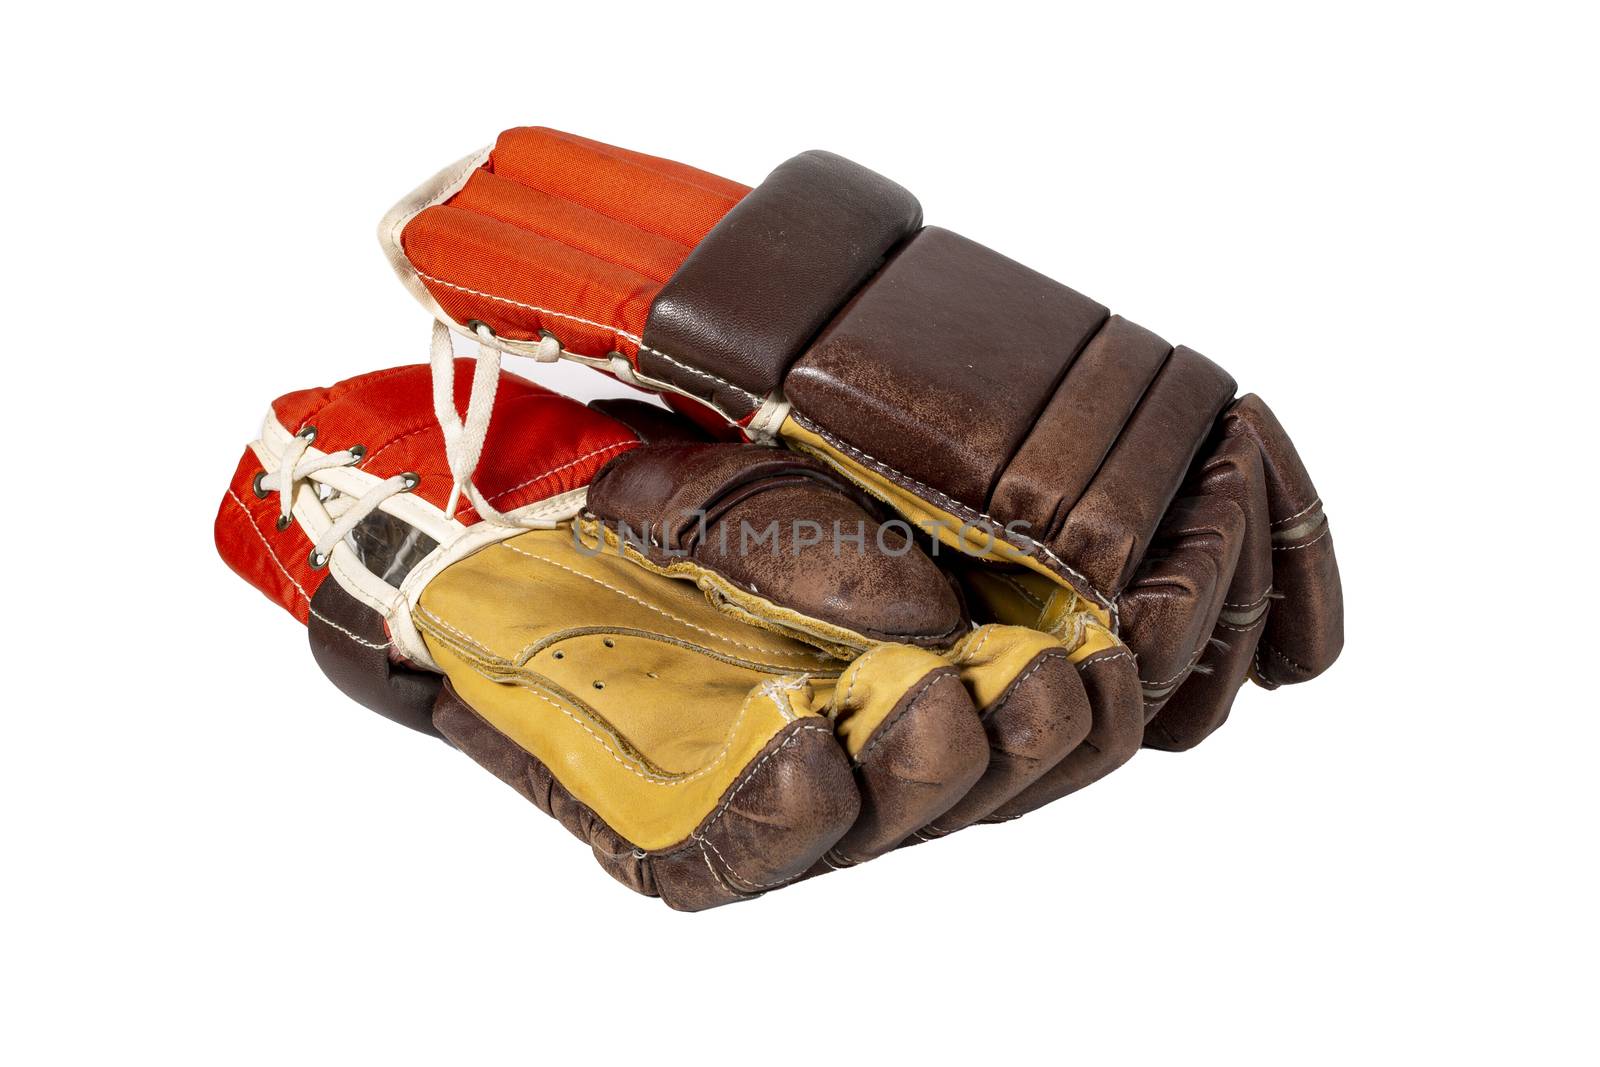 Old red hockey gloves for goalkeeper. Isolated over white background by 977_ReX_977